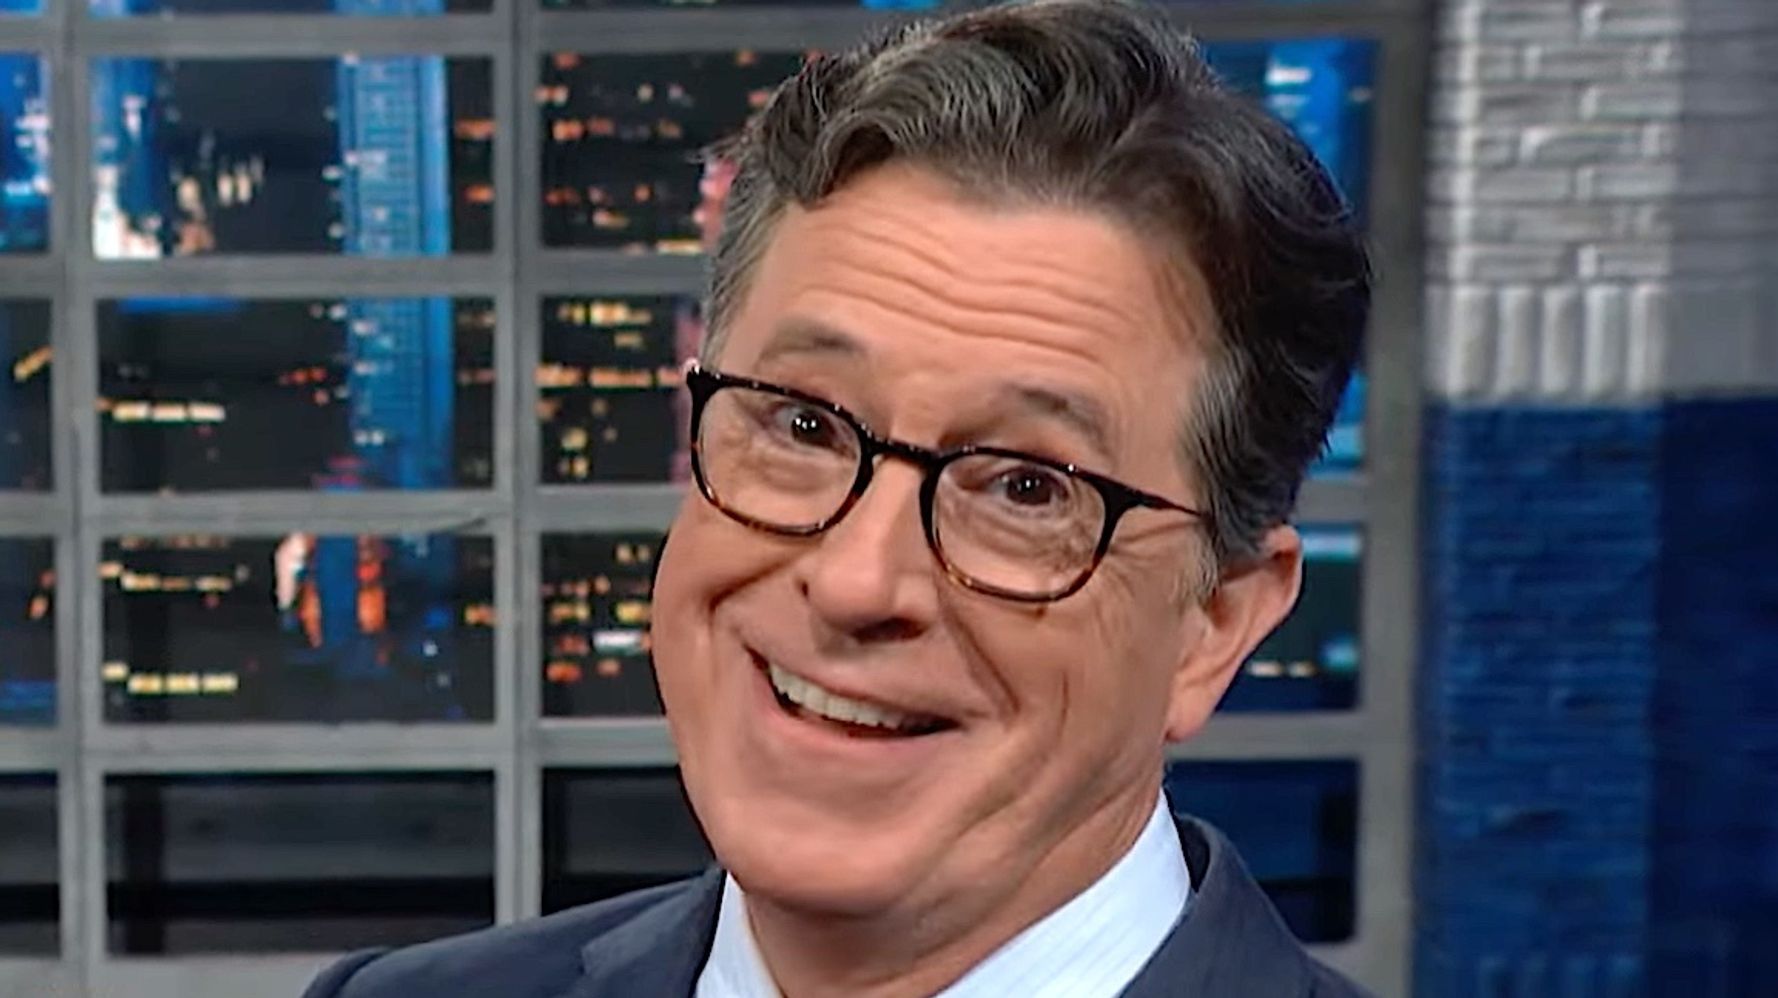 Stephen Colbert Answers Trump's 'Ominous' Rhyme With A Scathing Poem Of His Own